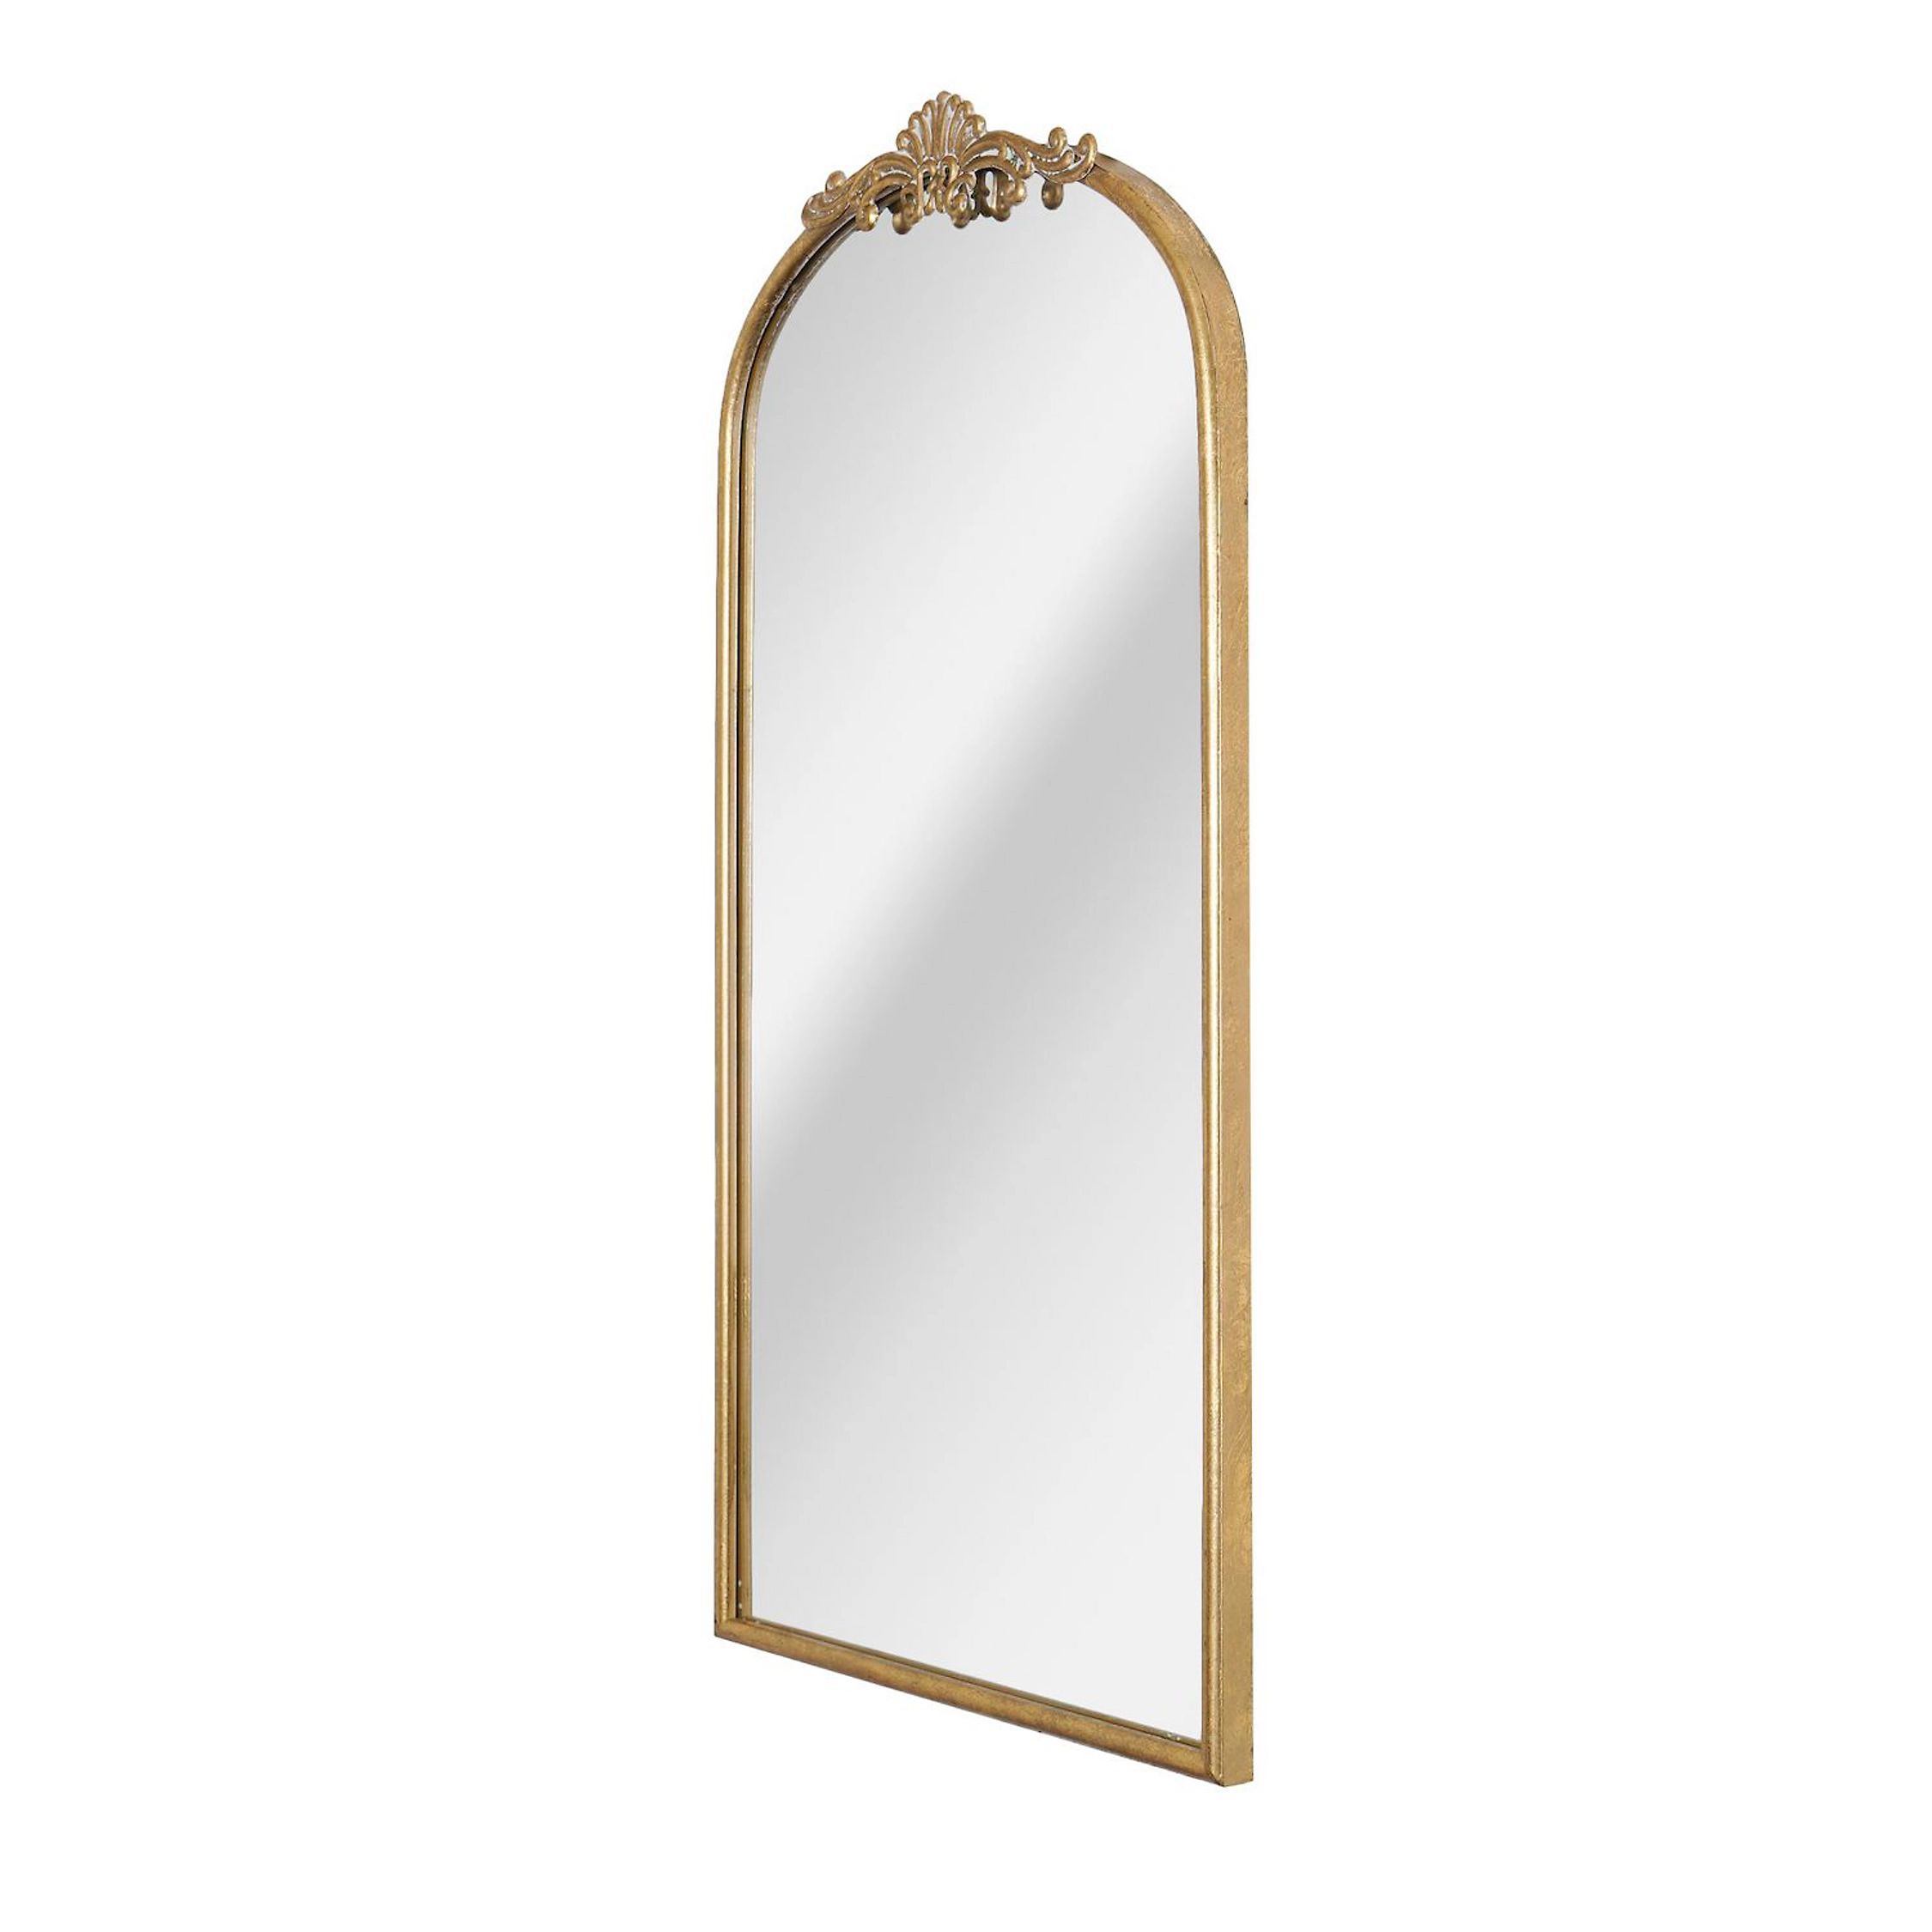 Head West Antique Gold Ornate Wall Mirror | Kohl's